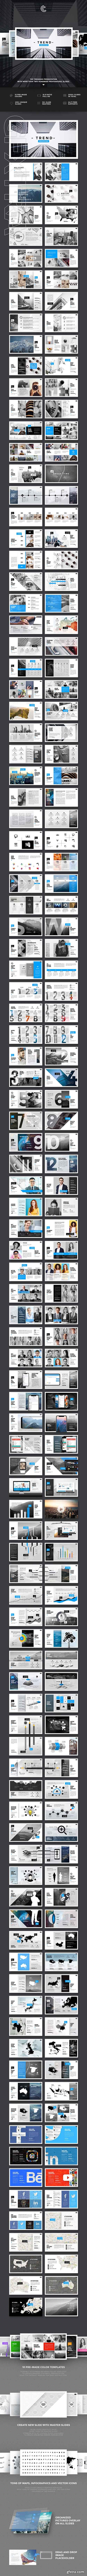 Graphicriver - Trend PowerPoint 21309492